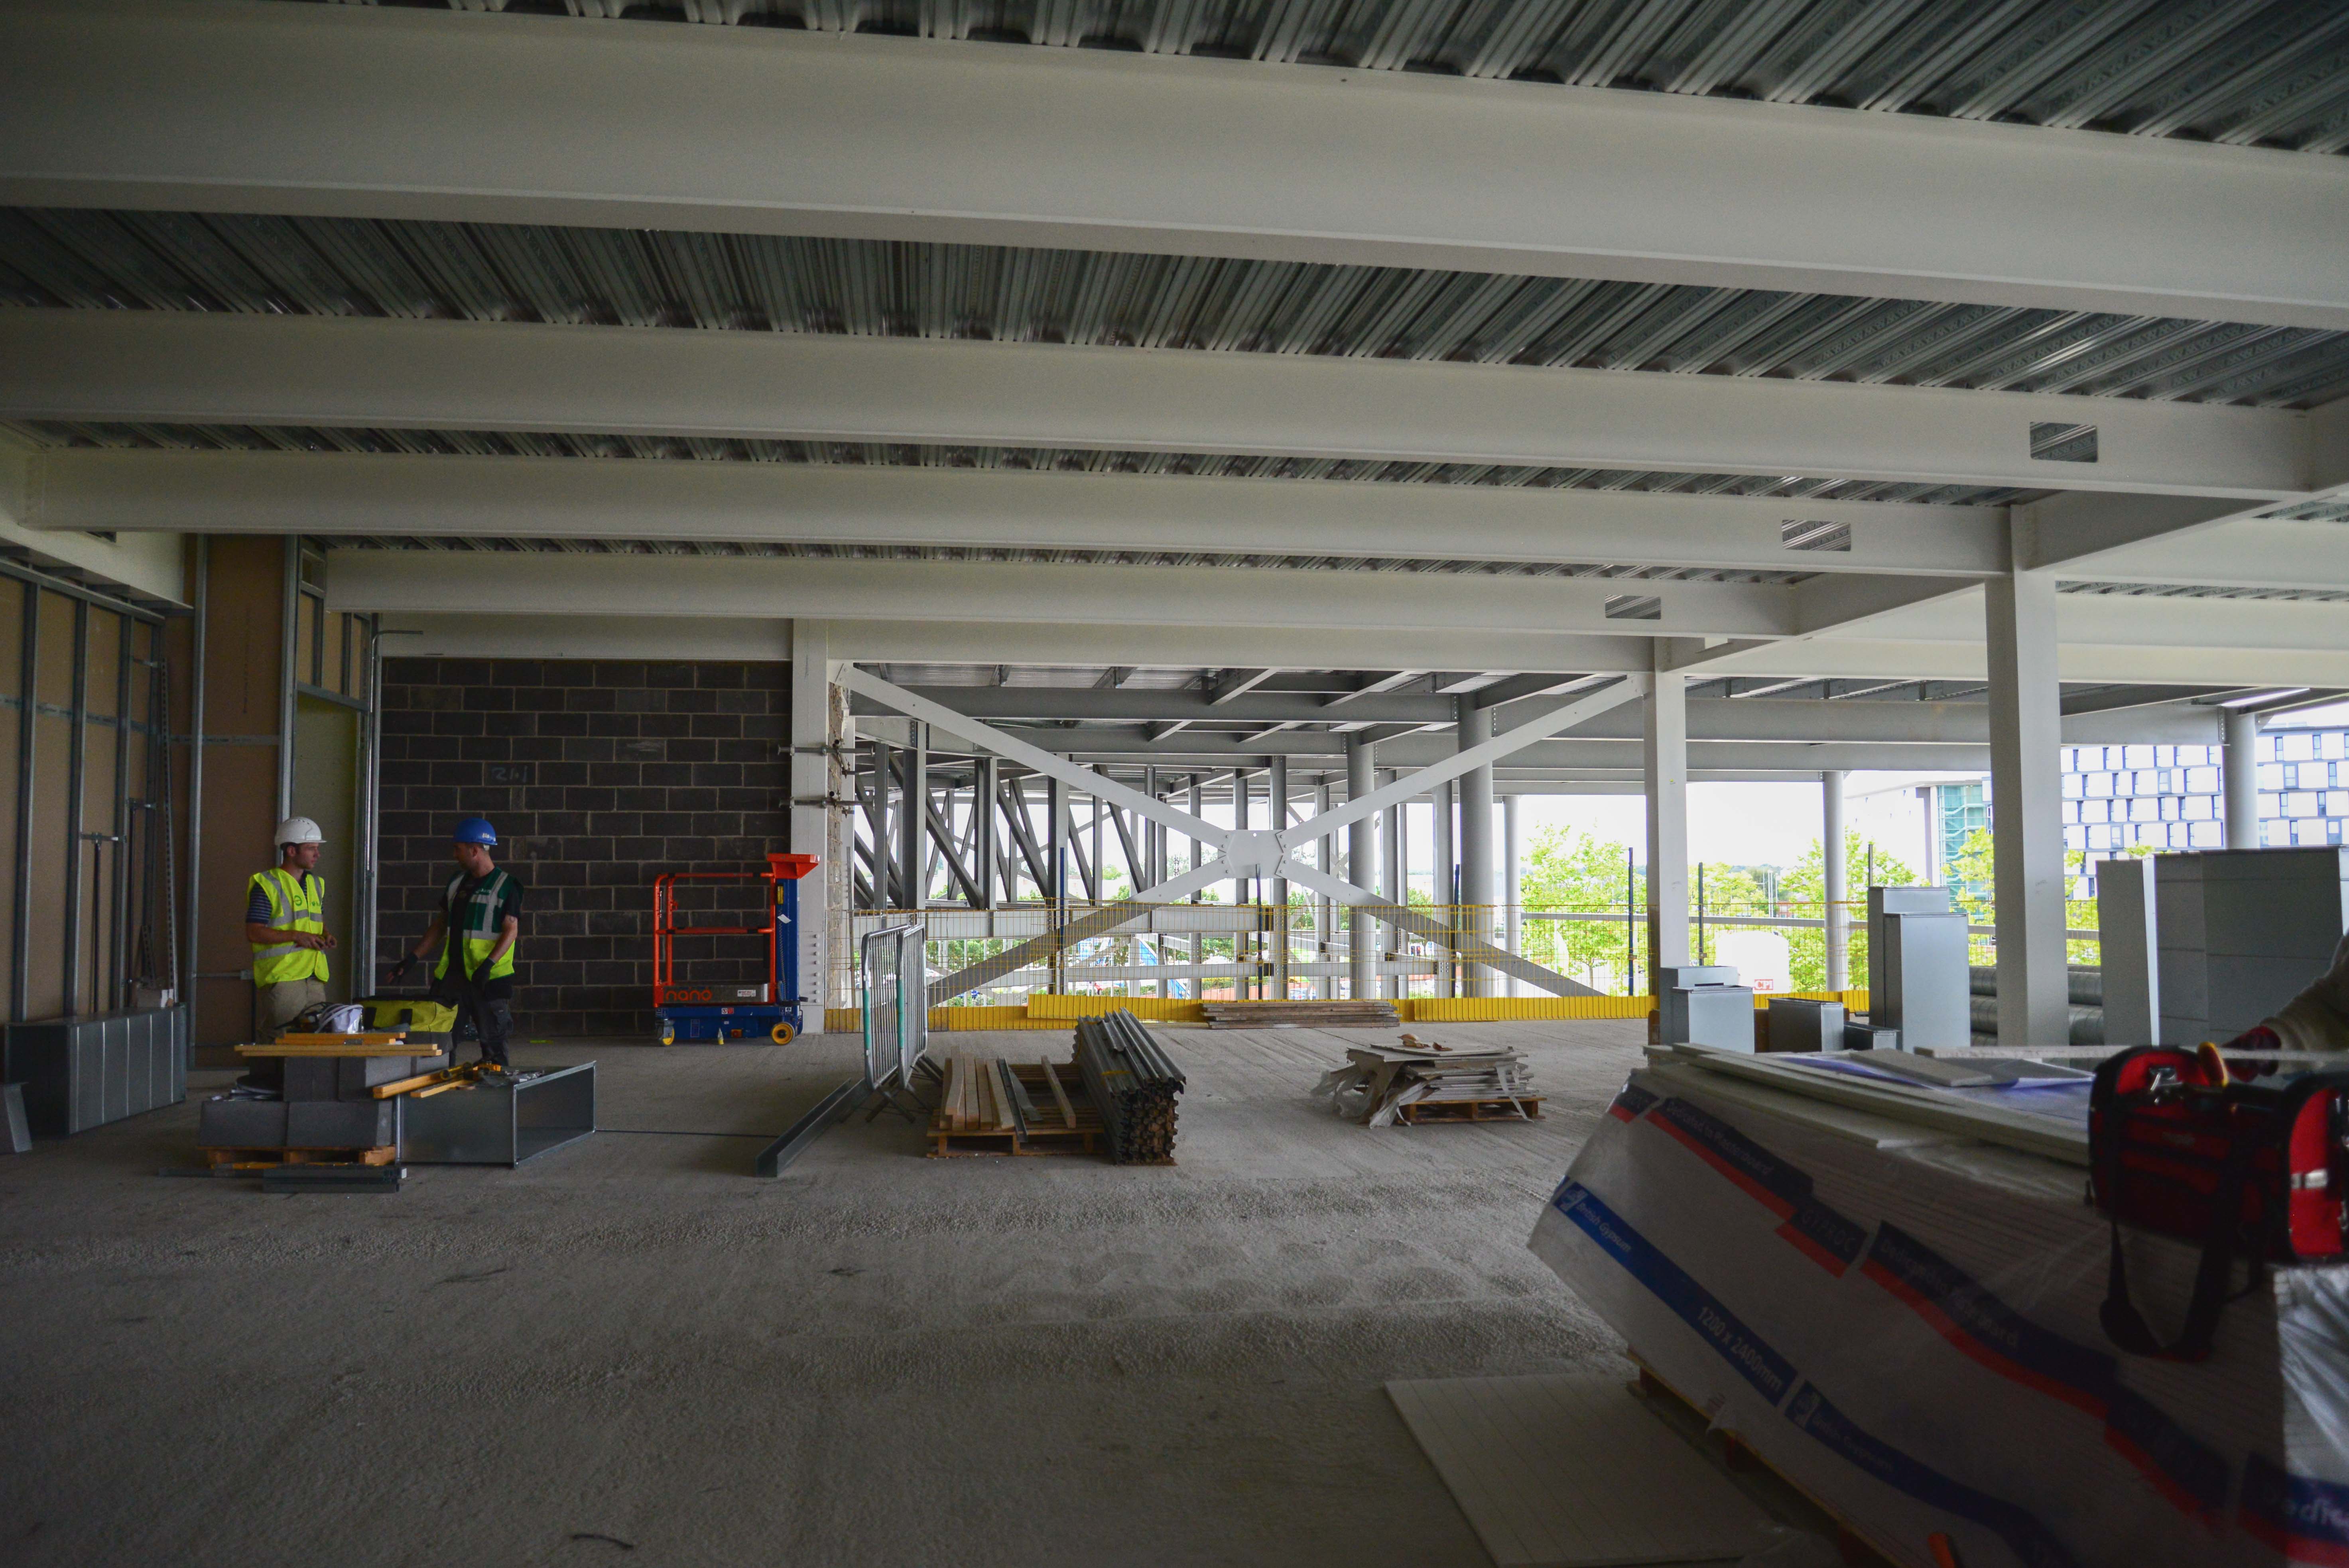 Image of a large room in construction. The walls and ceiling are bare